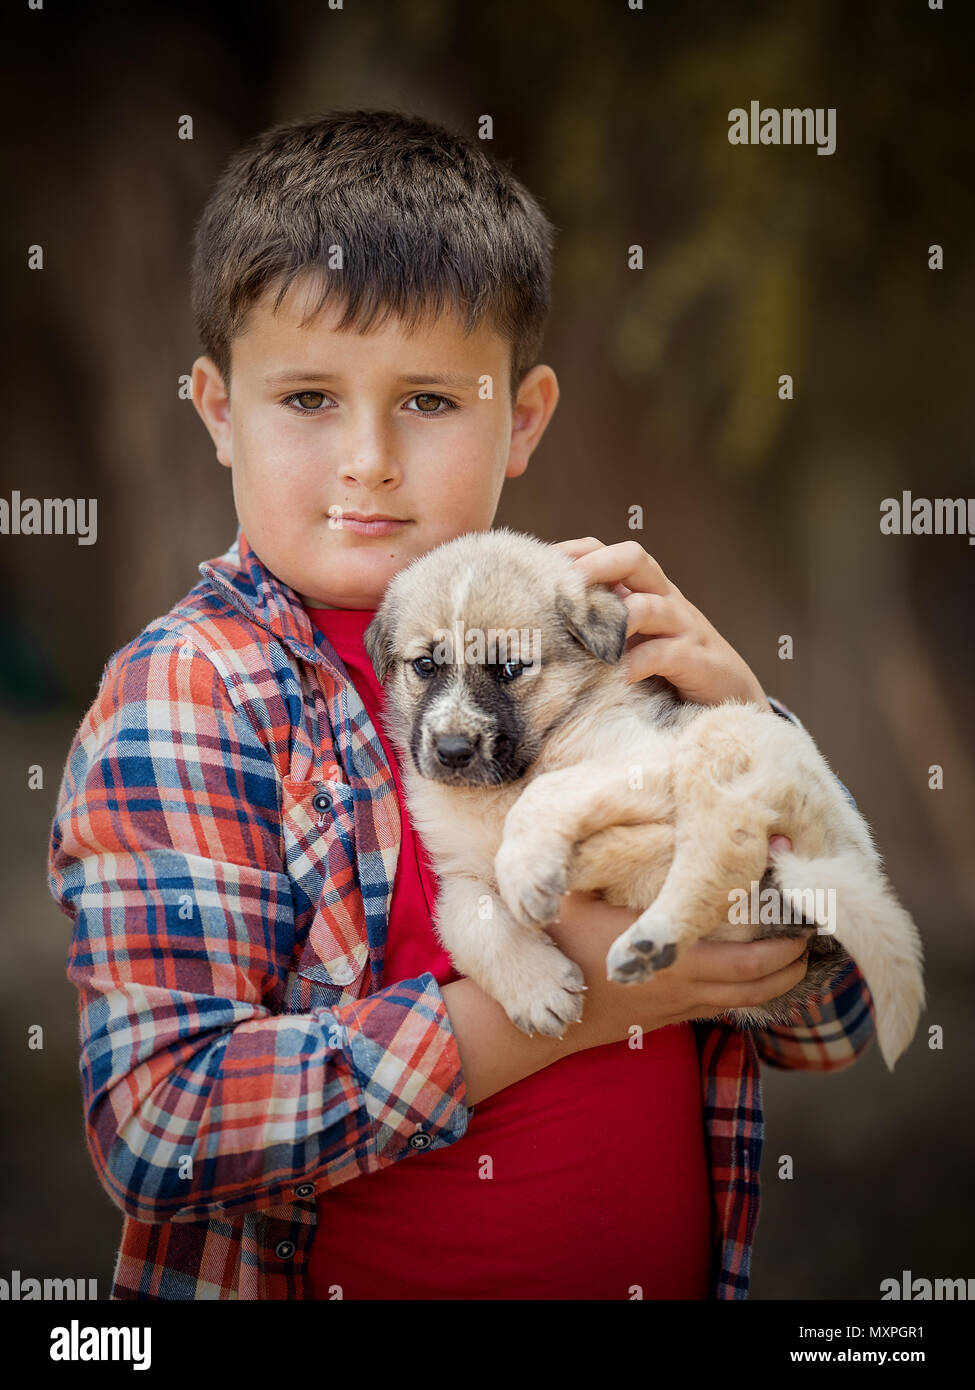 Handsome little boy is holding a dog. Close-up portrait Stock Photo